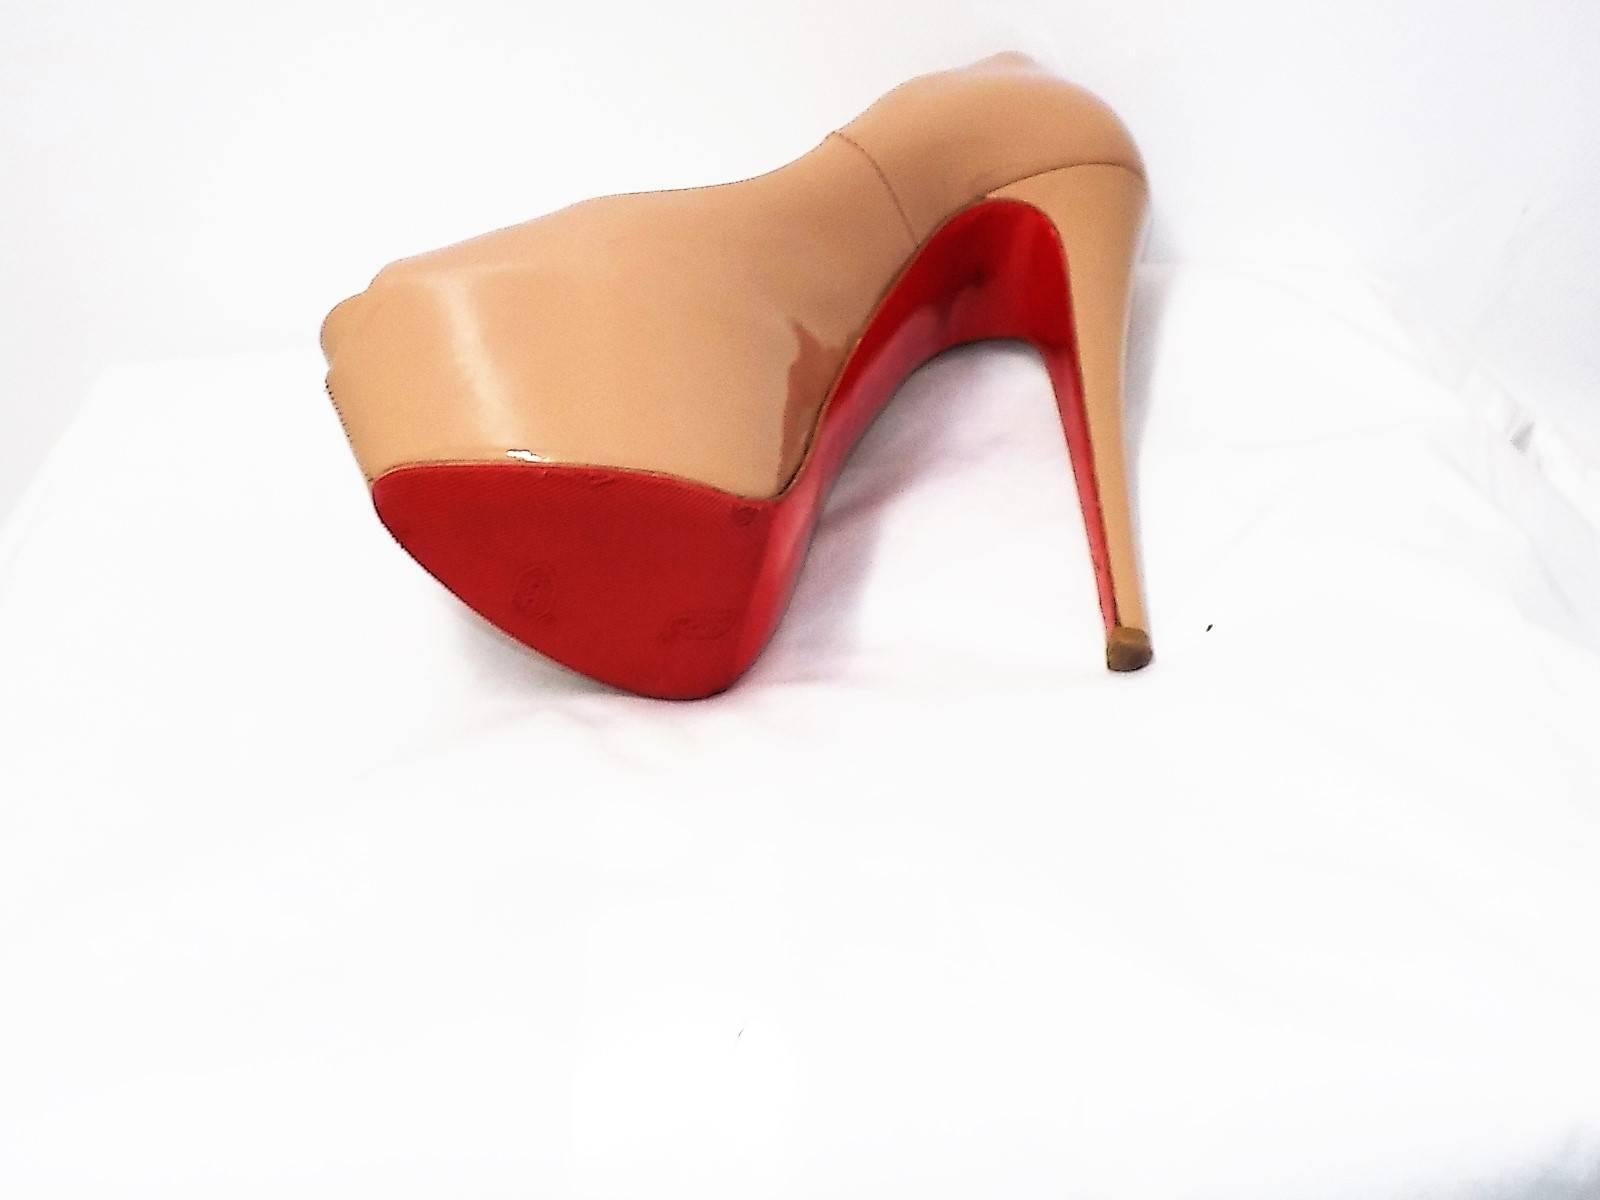 This is an authentic pair of CHRISTIAN LOUBOUTIN Patent Calf Highness 160 Peep Toe Platform Pumps 39 in Nude. These stunning pumps are crafted of glossy patent calfskin leather in beige. These feature a two inch covered platform and a 6.5 inches 